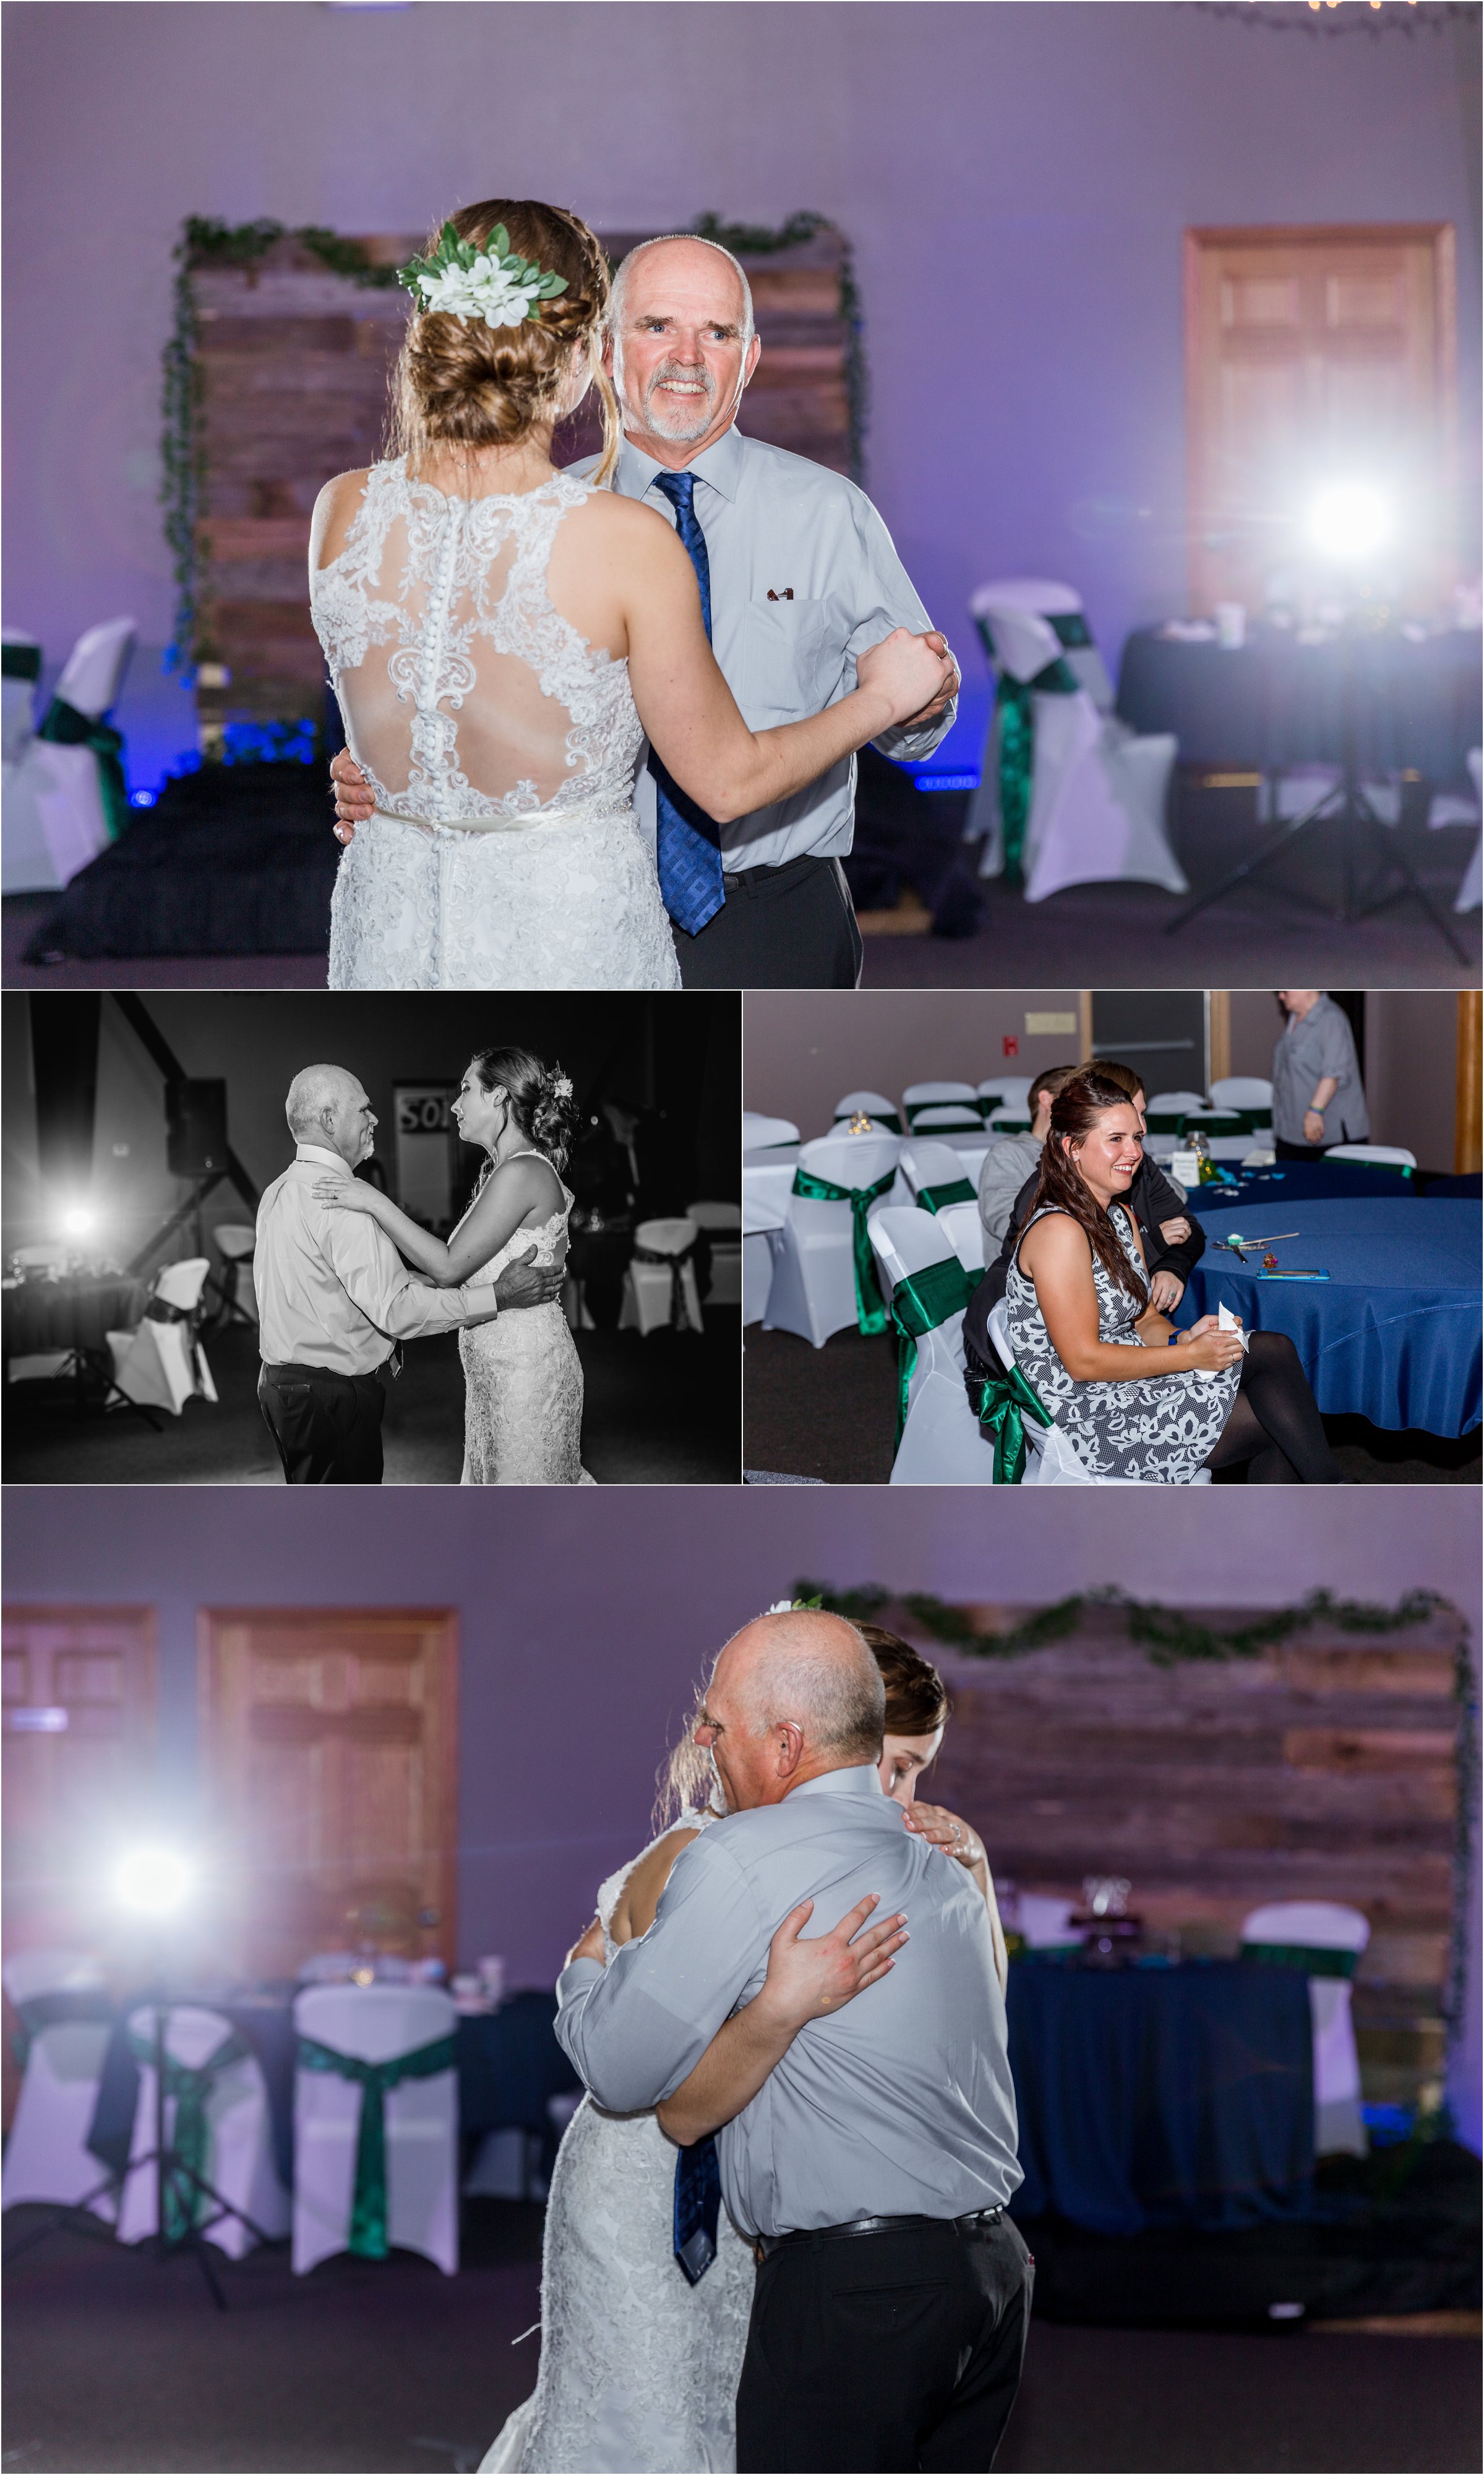 bride dancing with her dad at her wedding wedding reception under twinkly lights